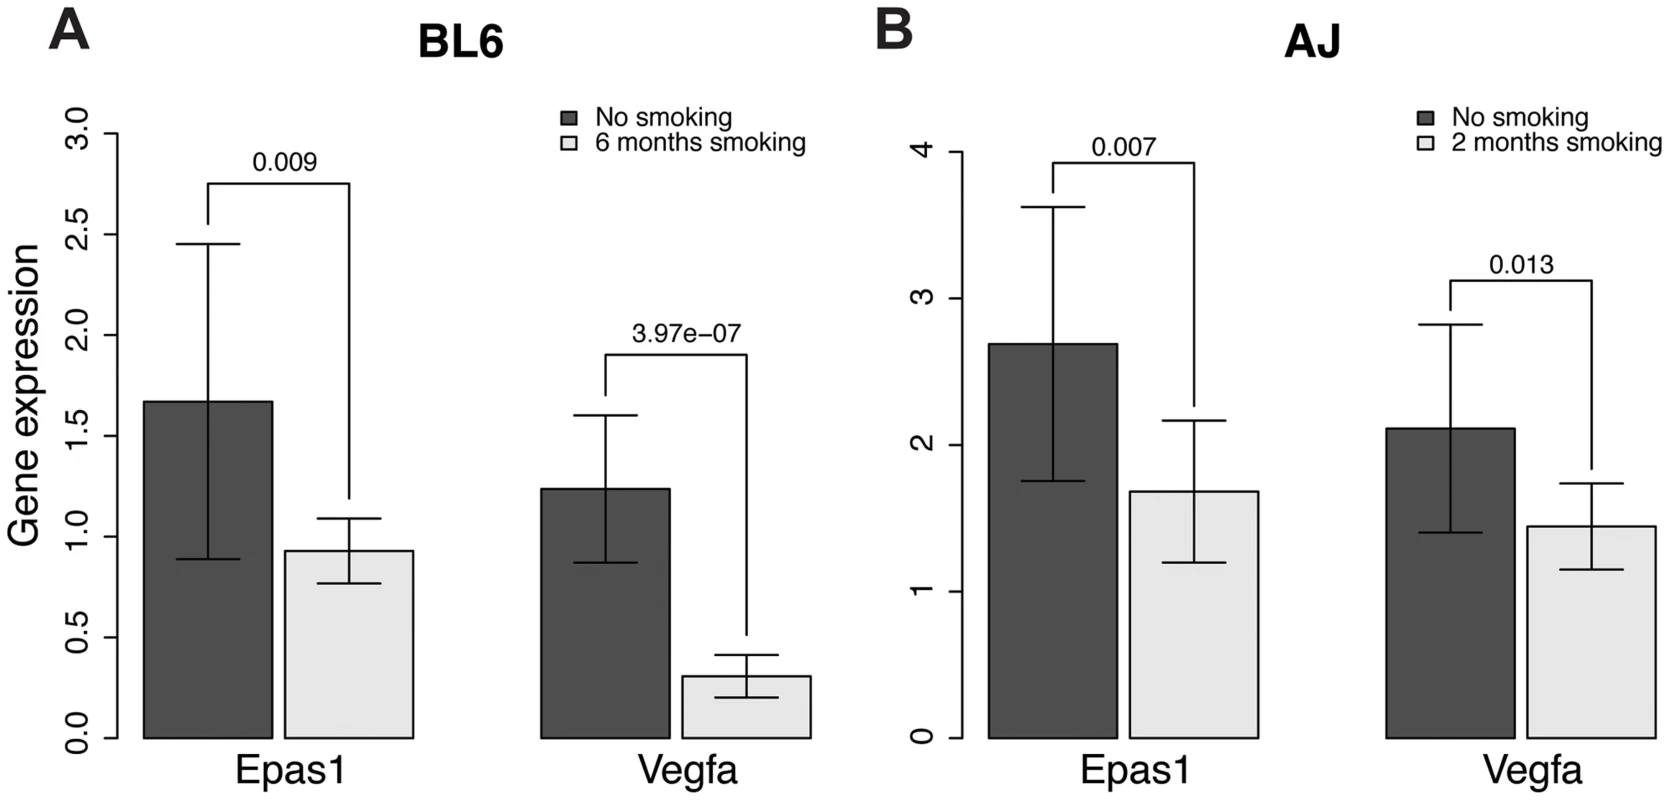 Gene expression levels of <i>Epas1</i> and <i>Vegfa</i> were lower in chronic smoking mice than non-smoking age-matched mice at the time when COPD develops in different mouse models.